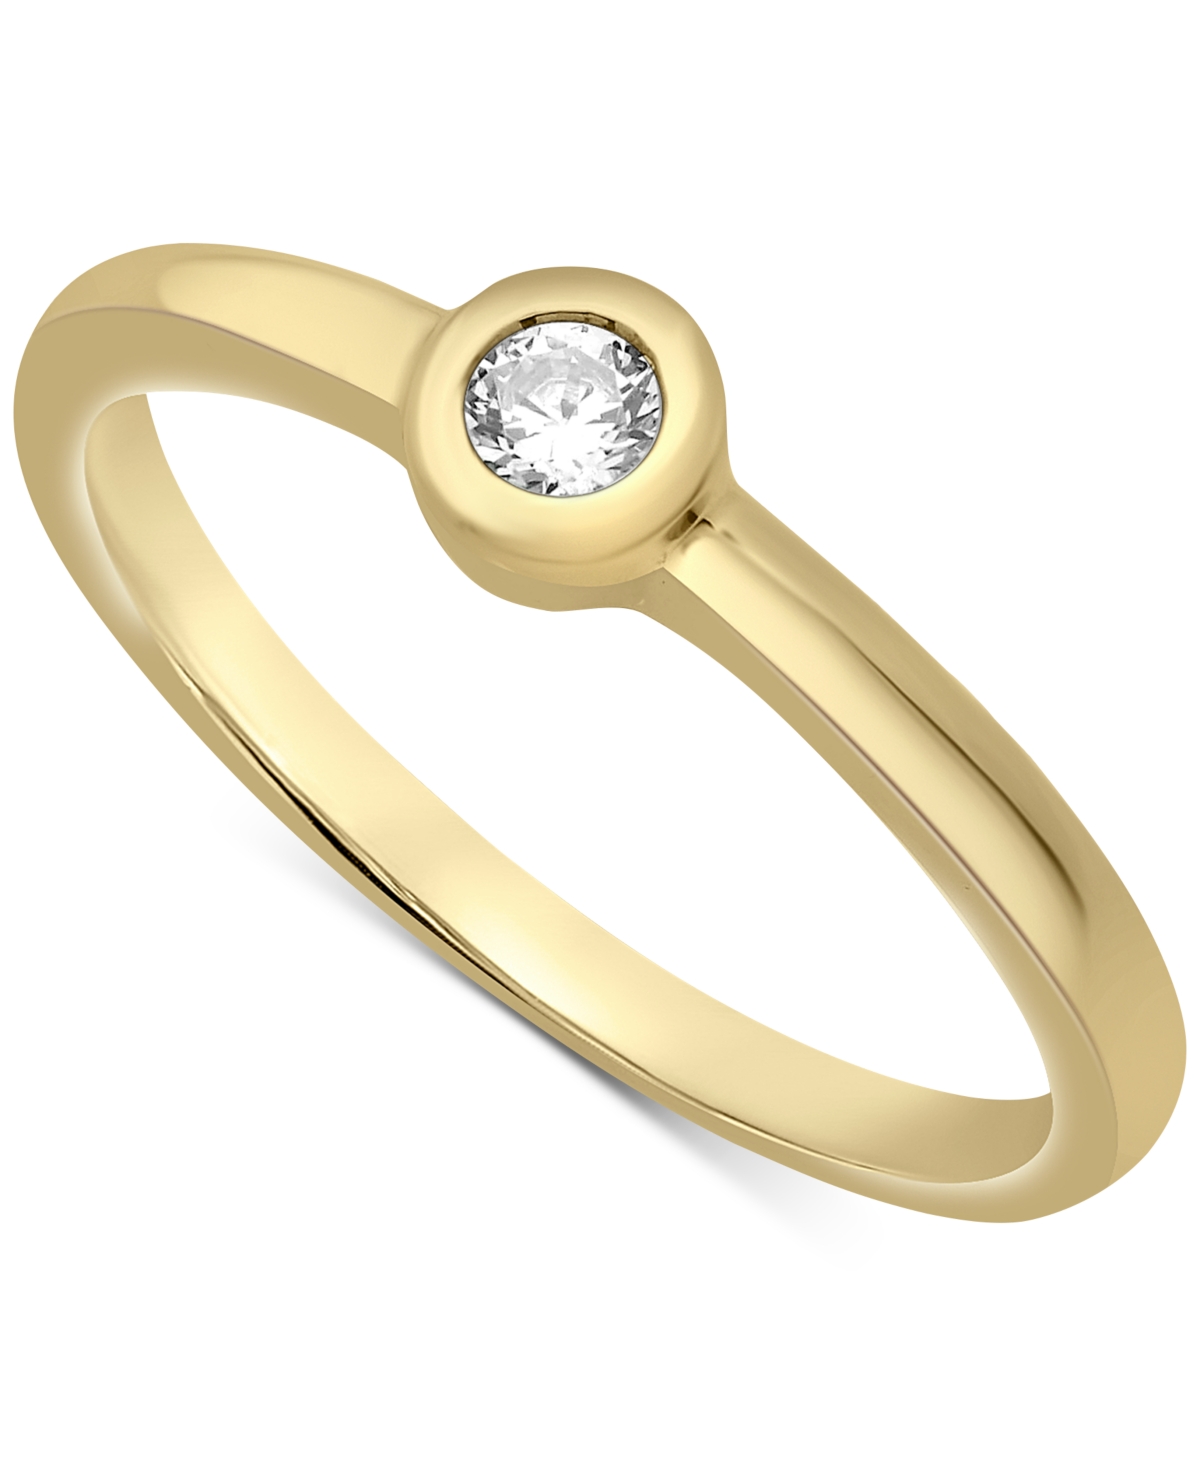 Certified Diamond Bezel Ring (1/10 ct. t.w.) in 14k Gold, Created for Macy's - Yellow Gold